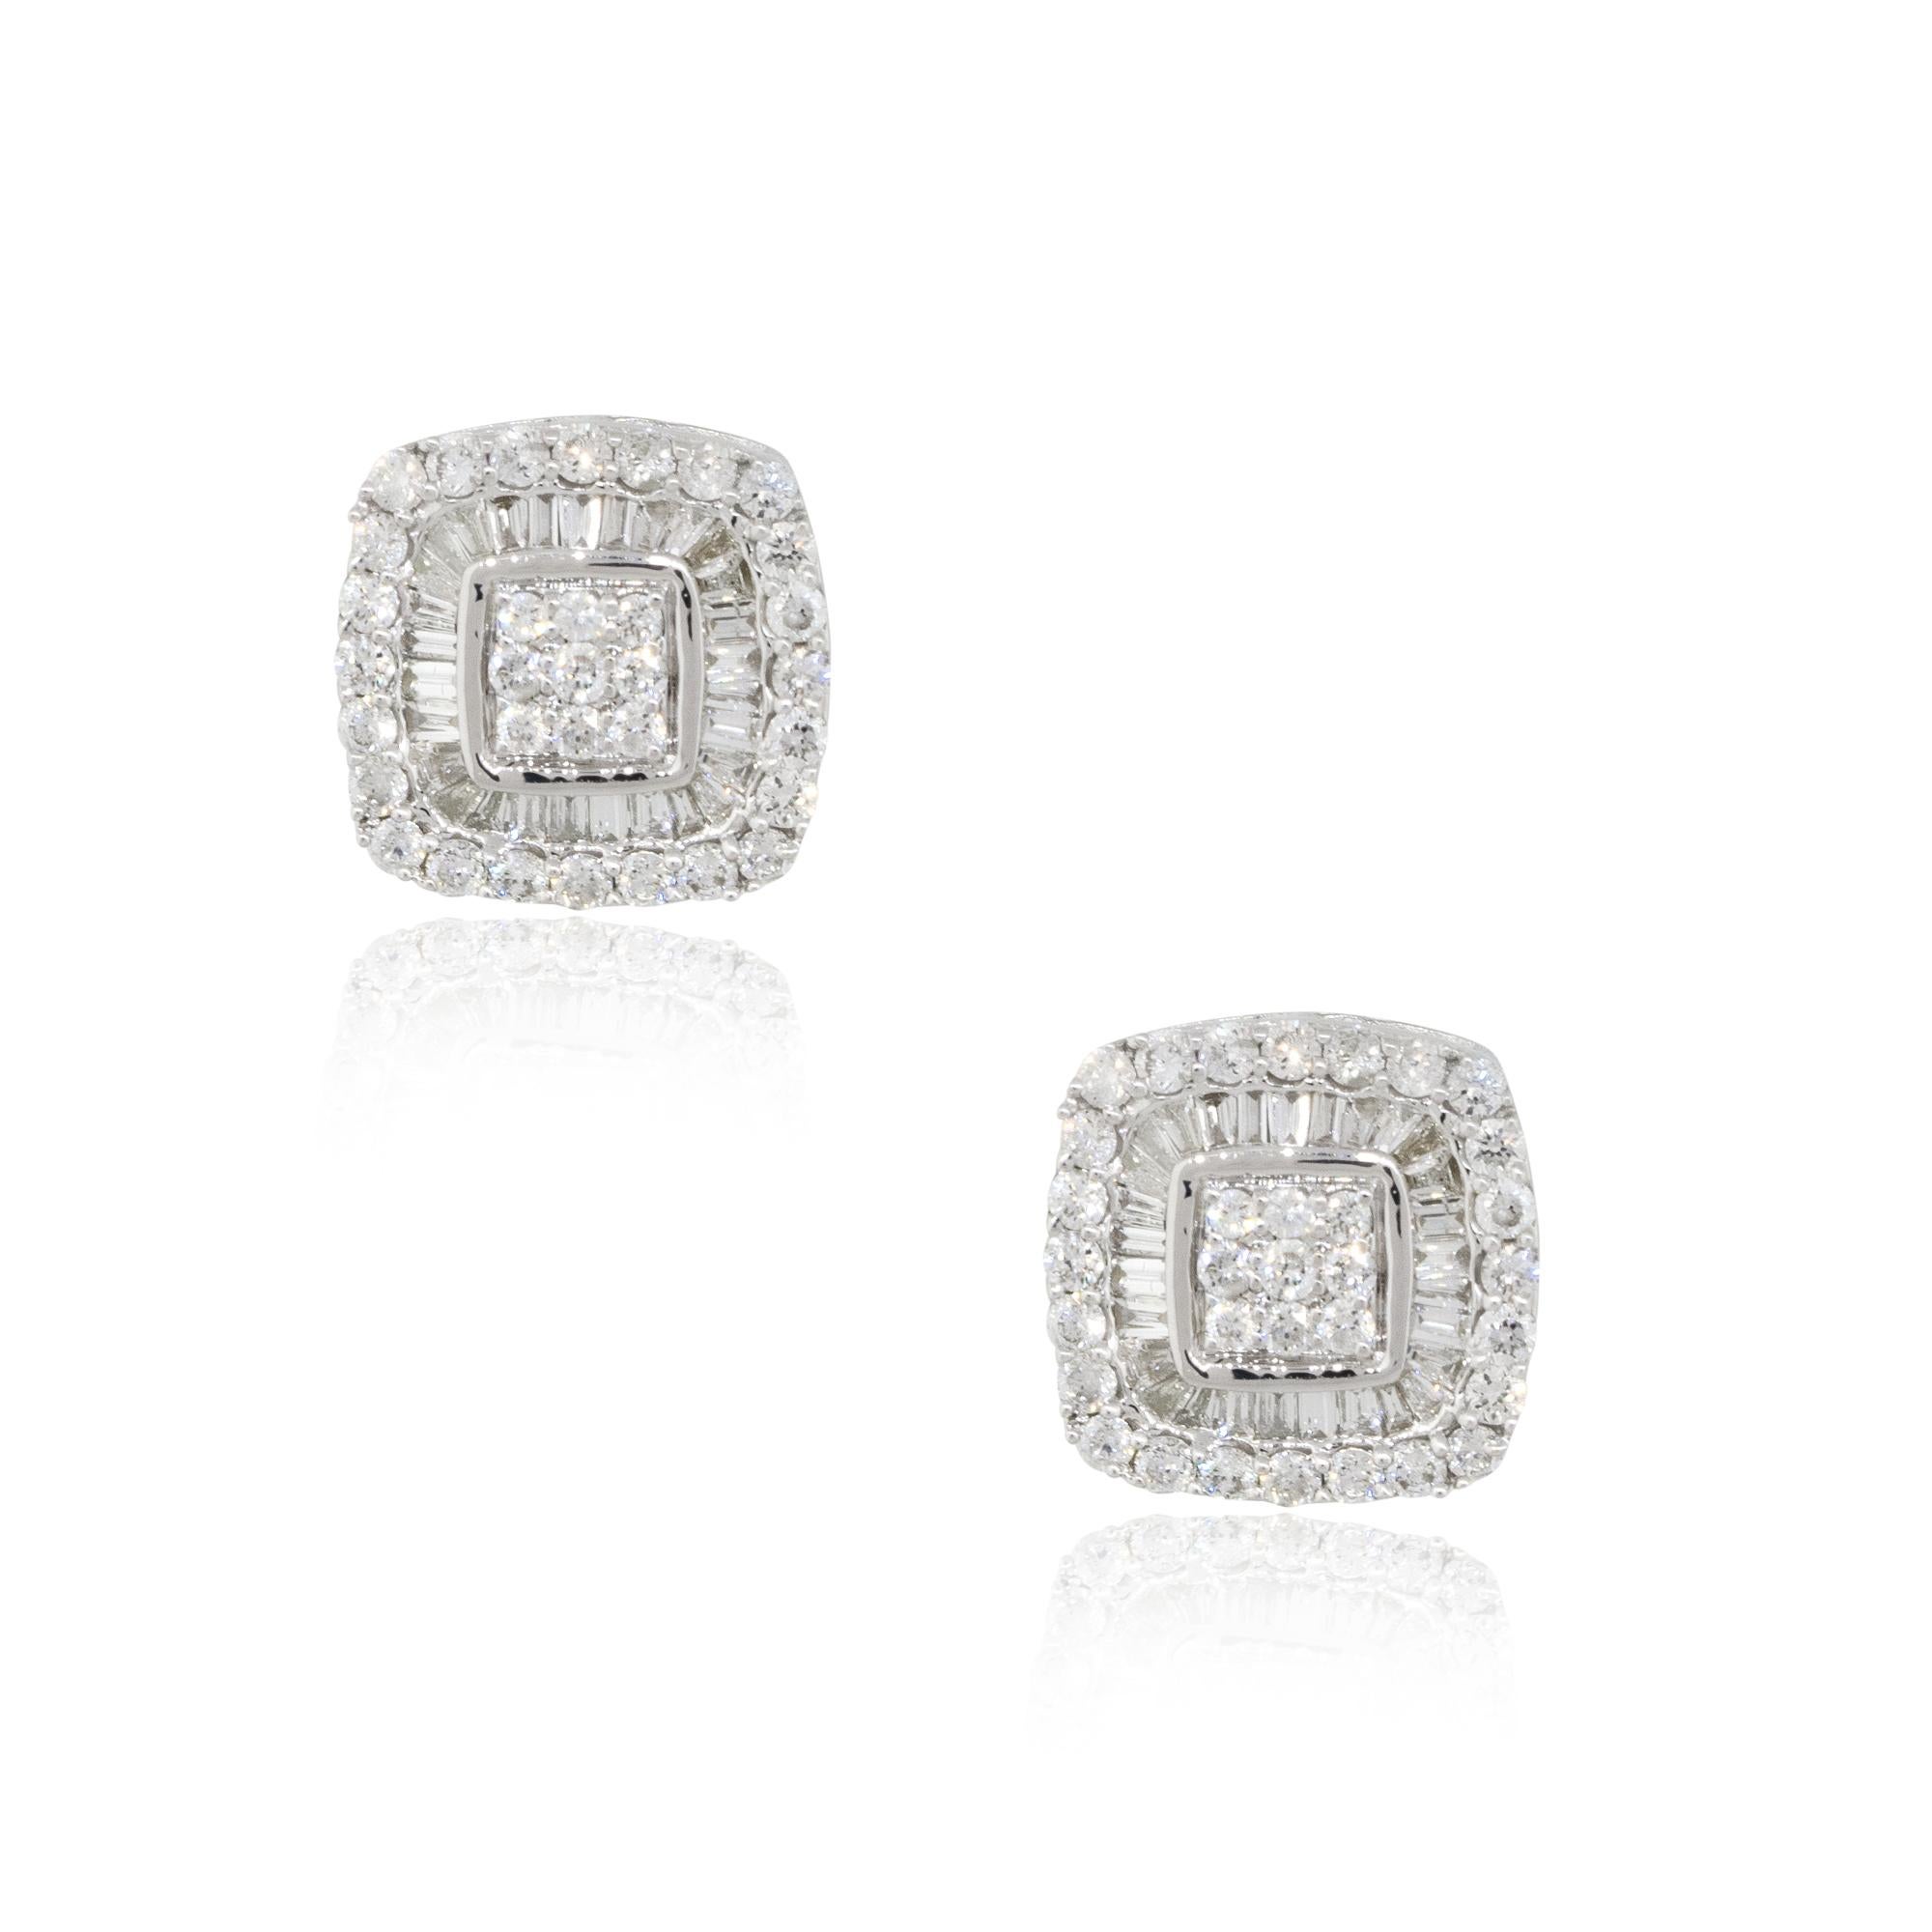 Material: 14k White Gold
Diamond Details: Approx. 0.66ctw of round and invisible set baguette Diamonds. Diamonds are G/H in color and VS in clarity.
Measurements: 9.5mm x 15mm x 9.5mm
Earrings Backs: Tension posts
Total Weight: 2.7g